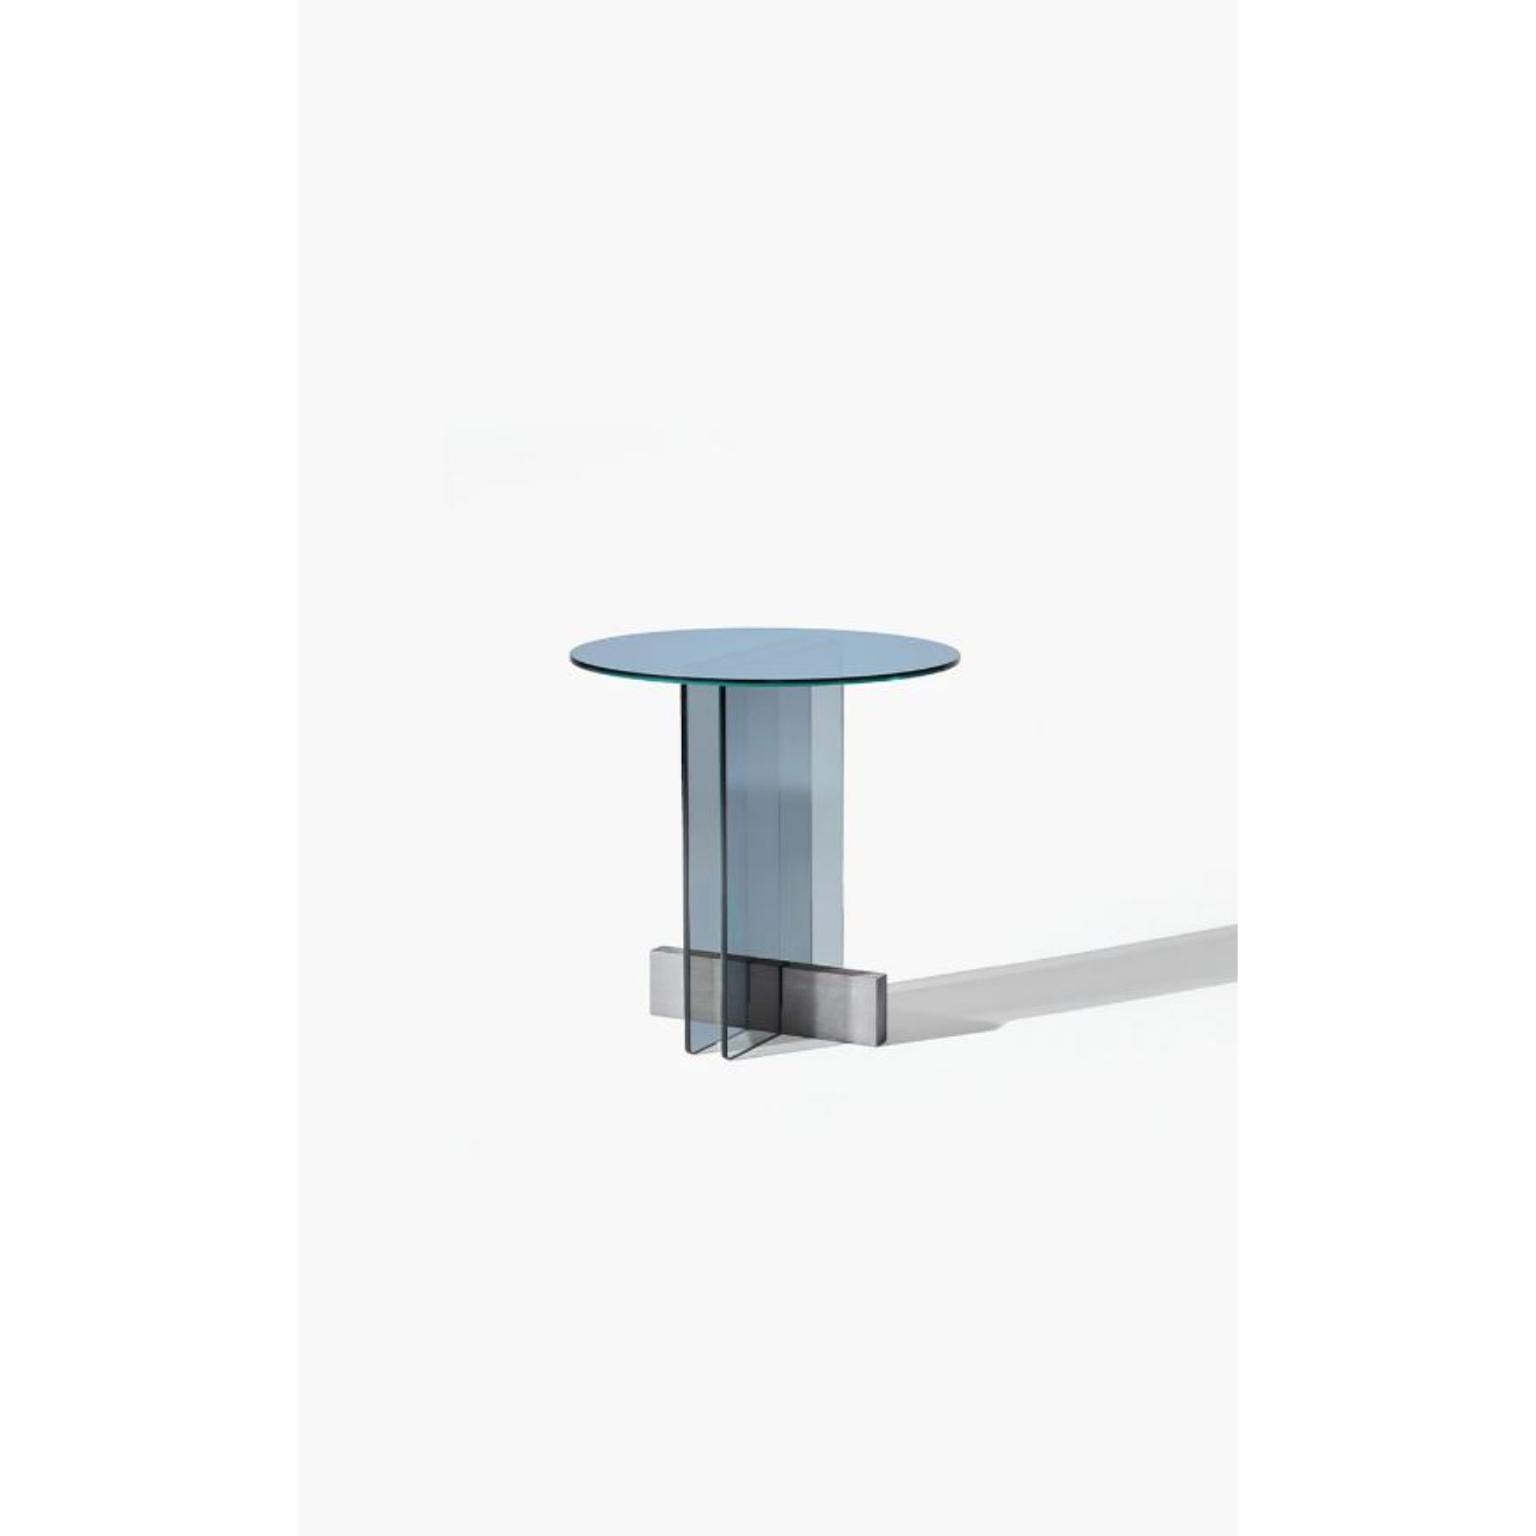 Vidro Side Table S by Wentz
Dimensions: D 60 x W 60 x H 40 cm
Materials: Glass, Wood.
Weight: 15,3kg / 33,7 lbs

The constant search for lightness in different forms led to a new project that has glass as the protagonist. The wooden base works as a